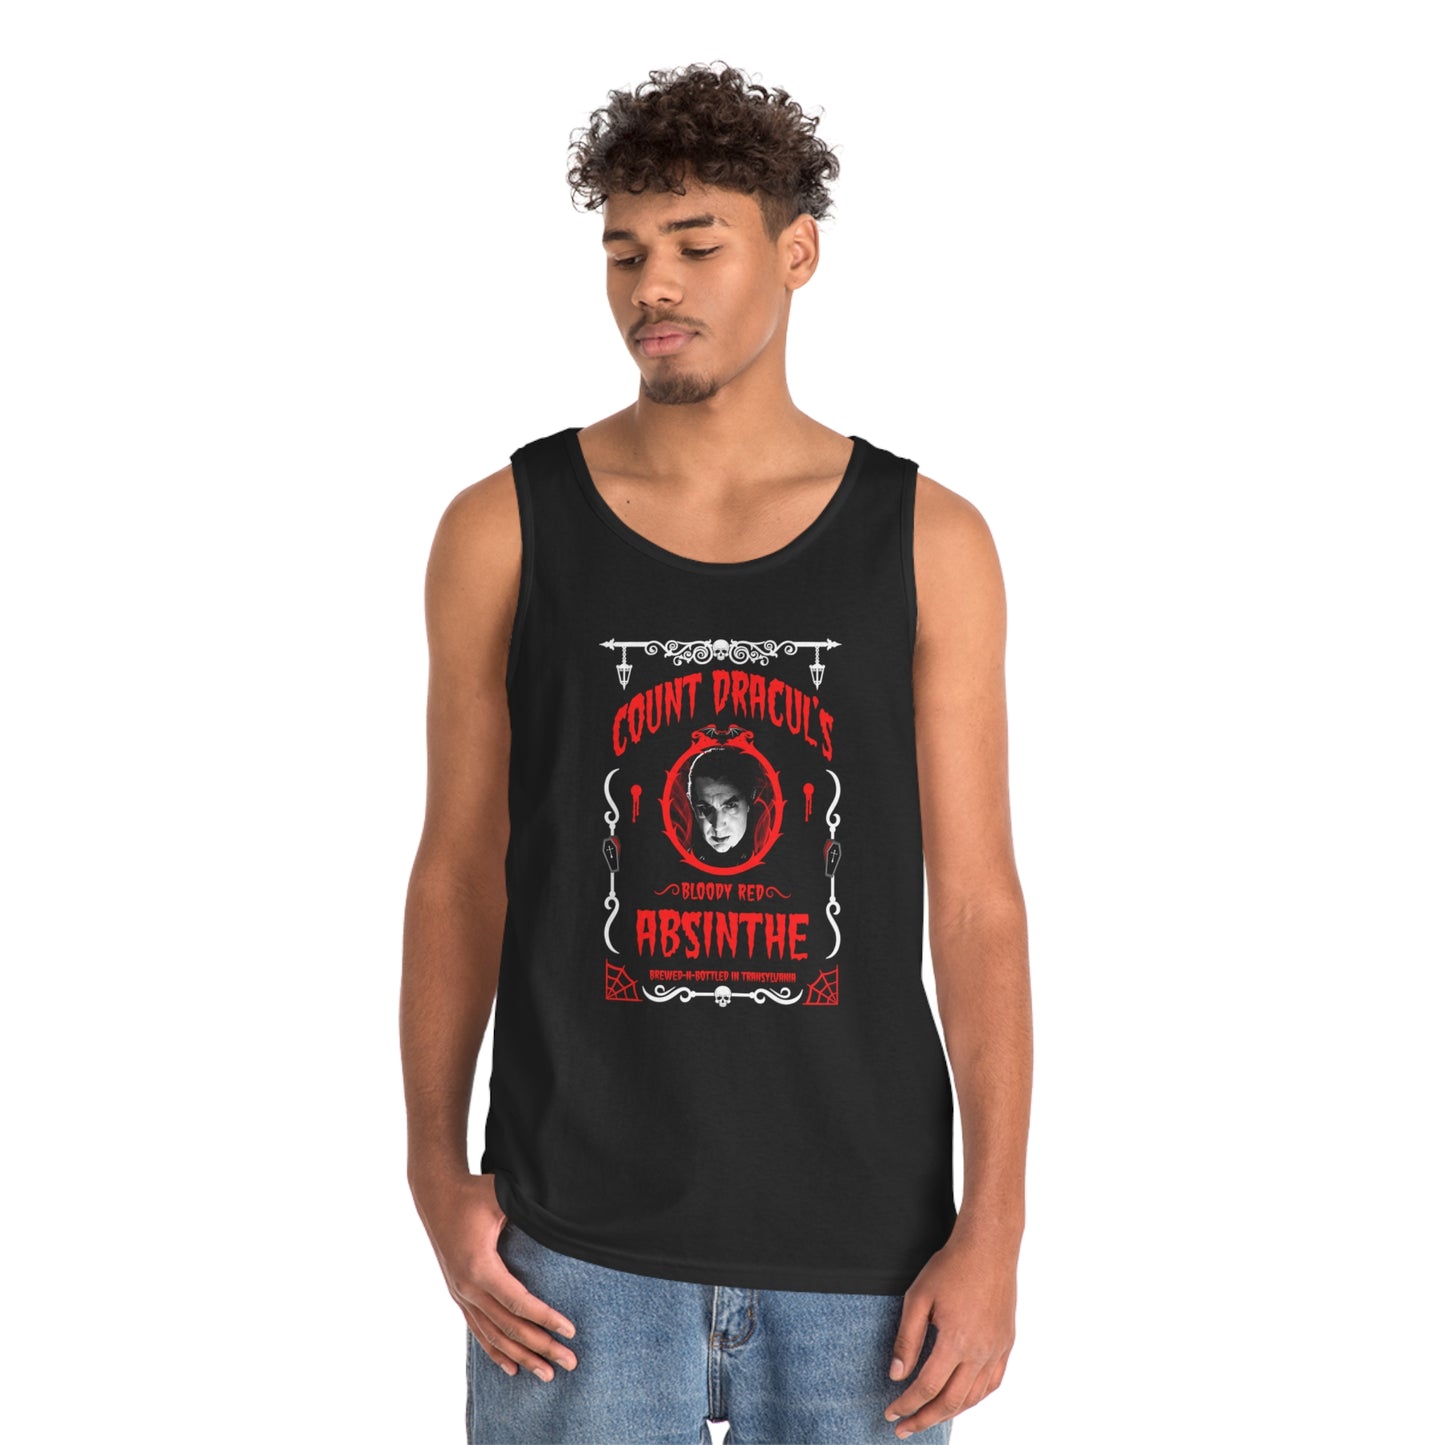 ABSINTHE MONSTERS 1 (COUNT DRACUL) Unisex Heavy Cotton Tank Top